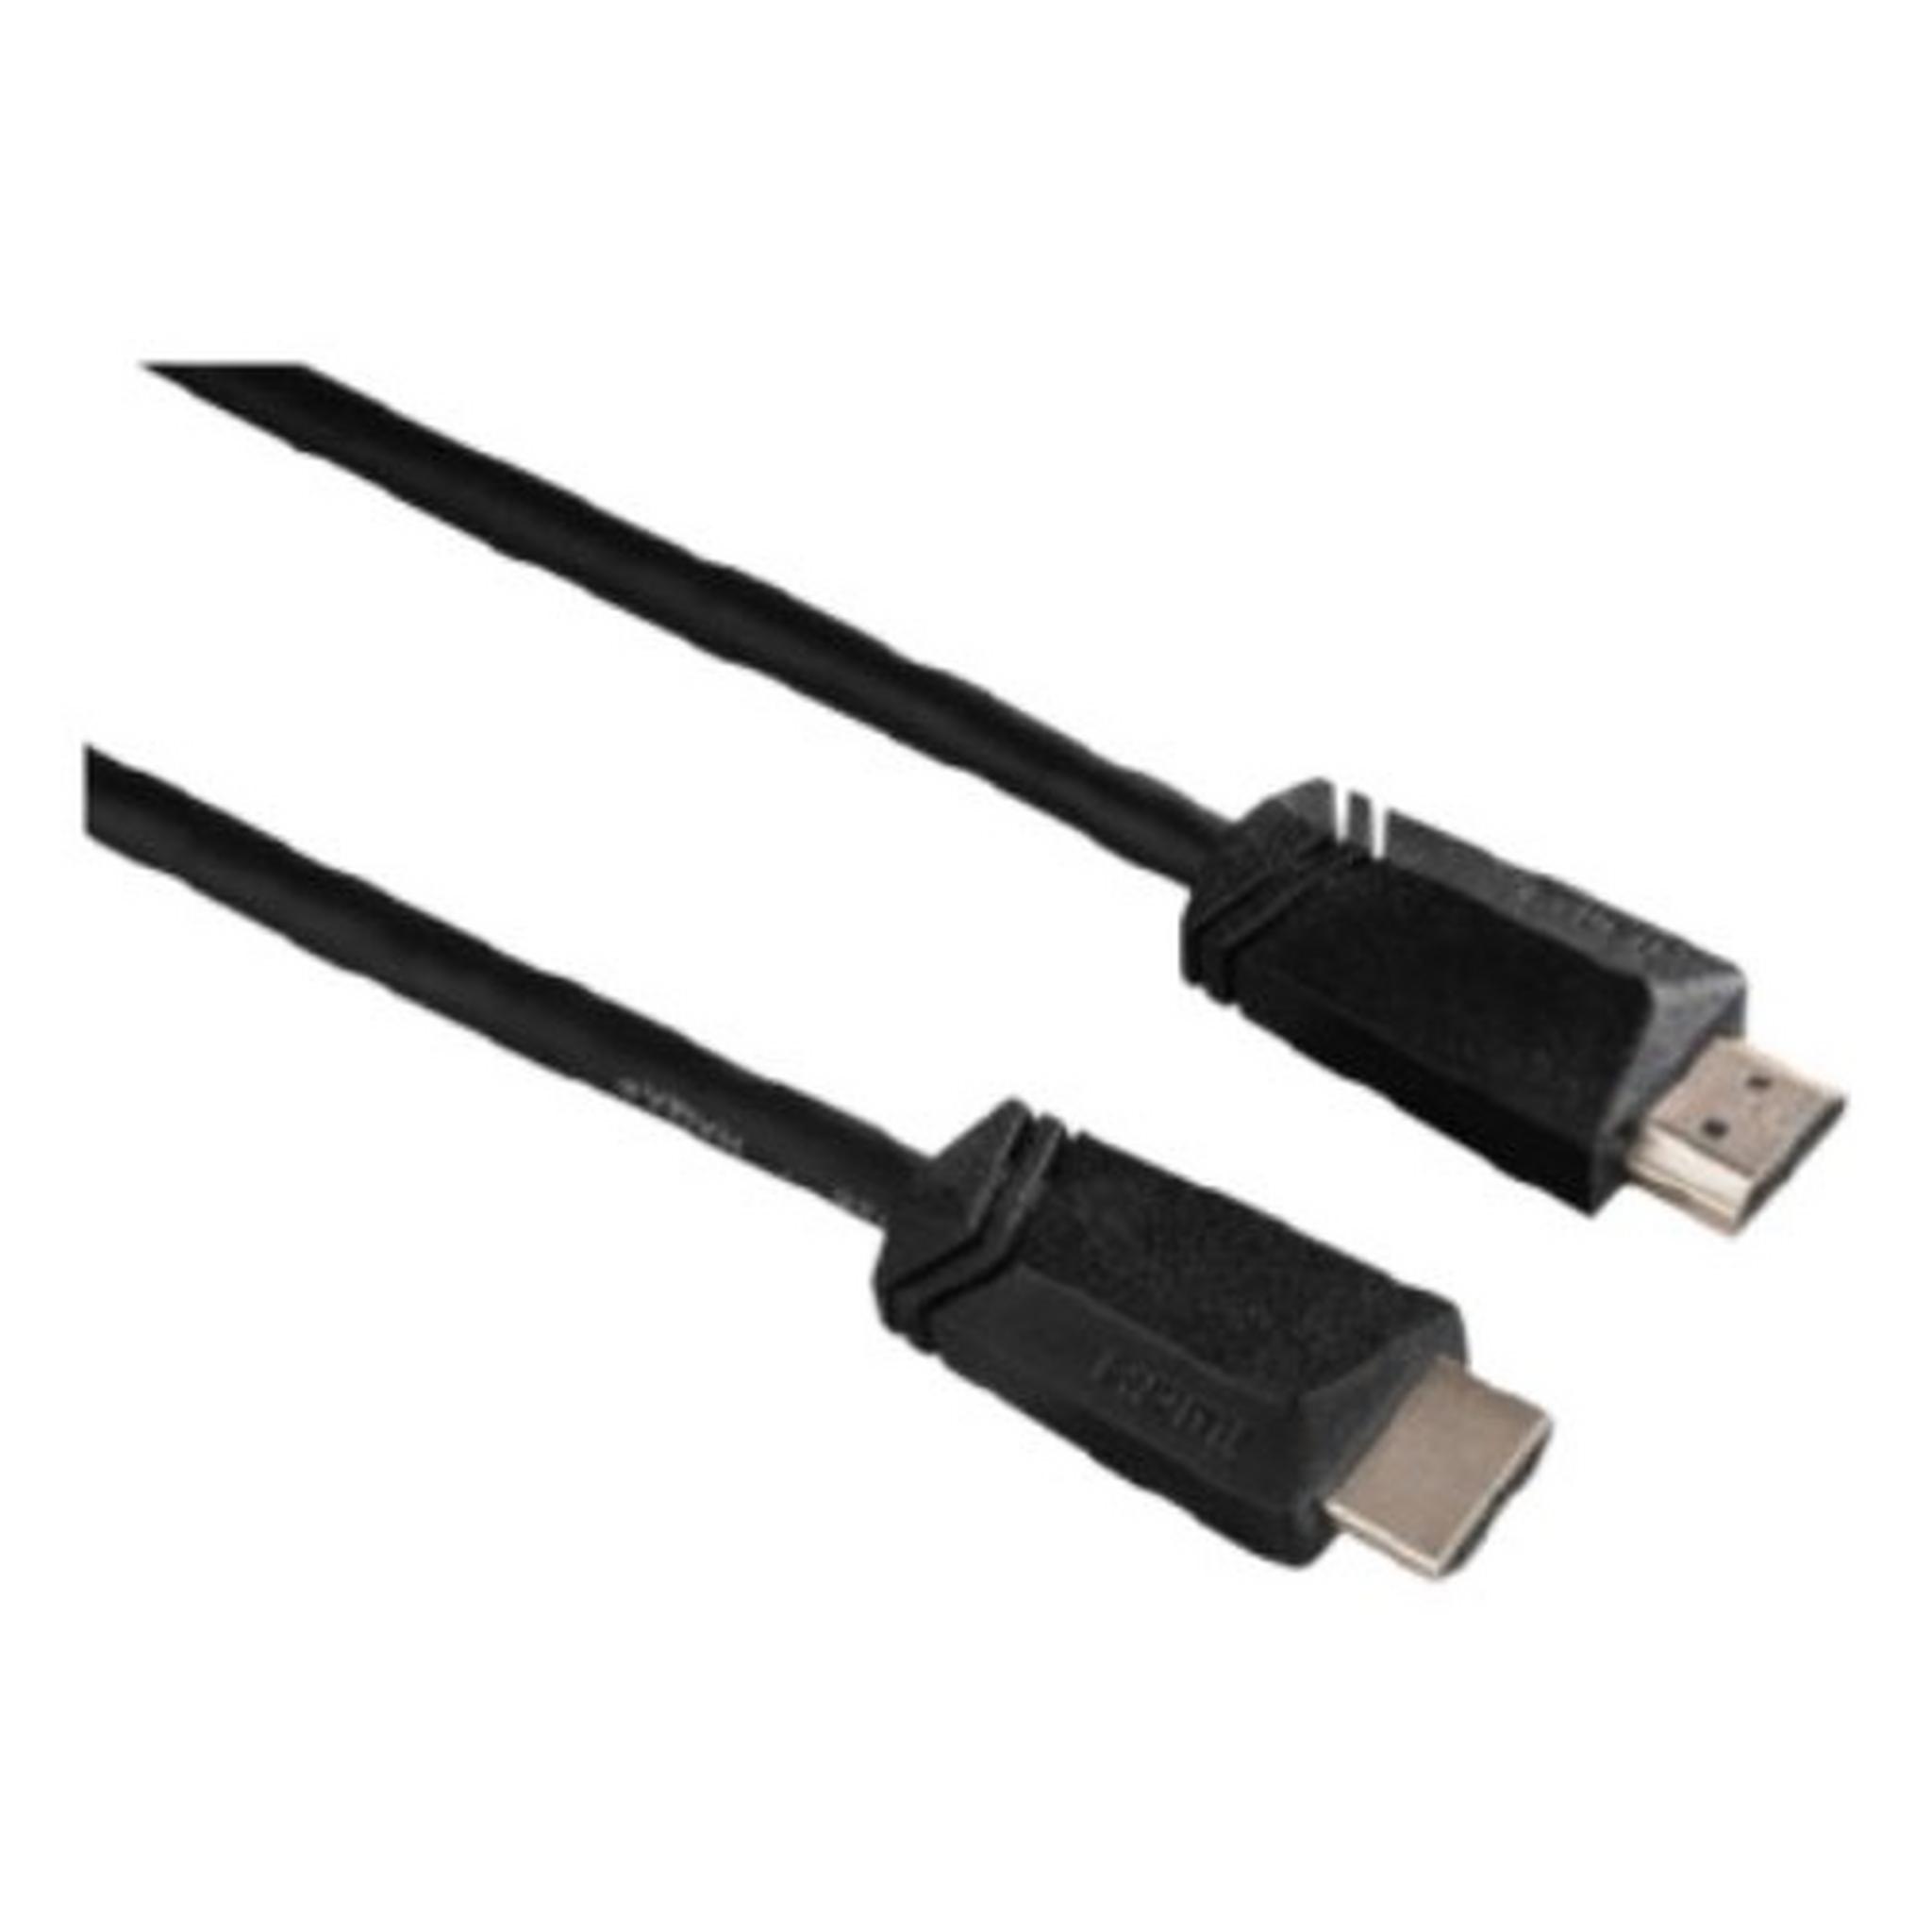 Hama High Speed HDMI Ethernet Cable - 5M